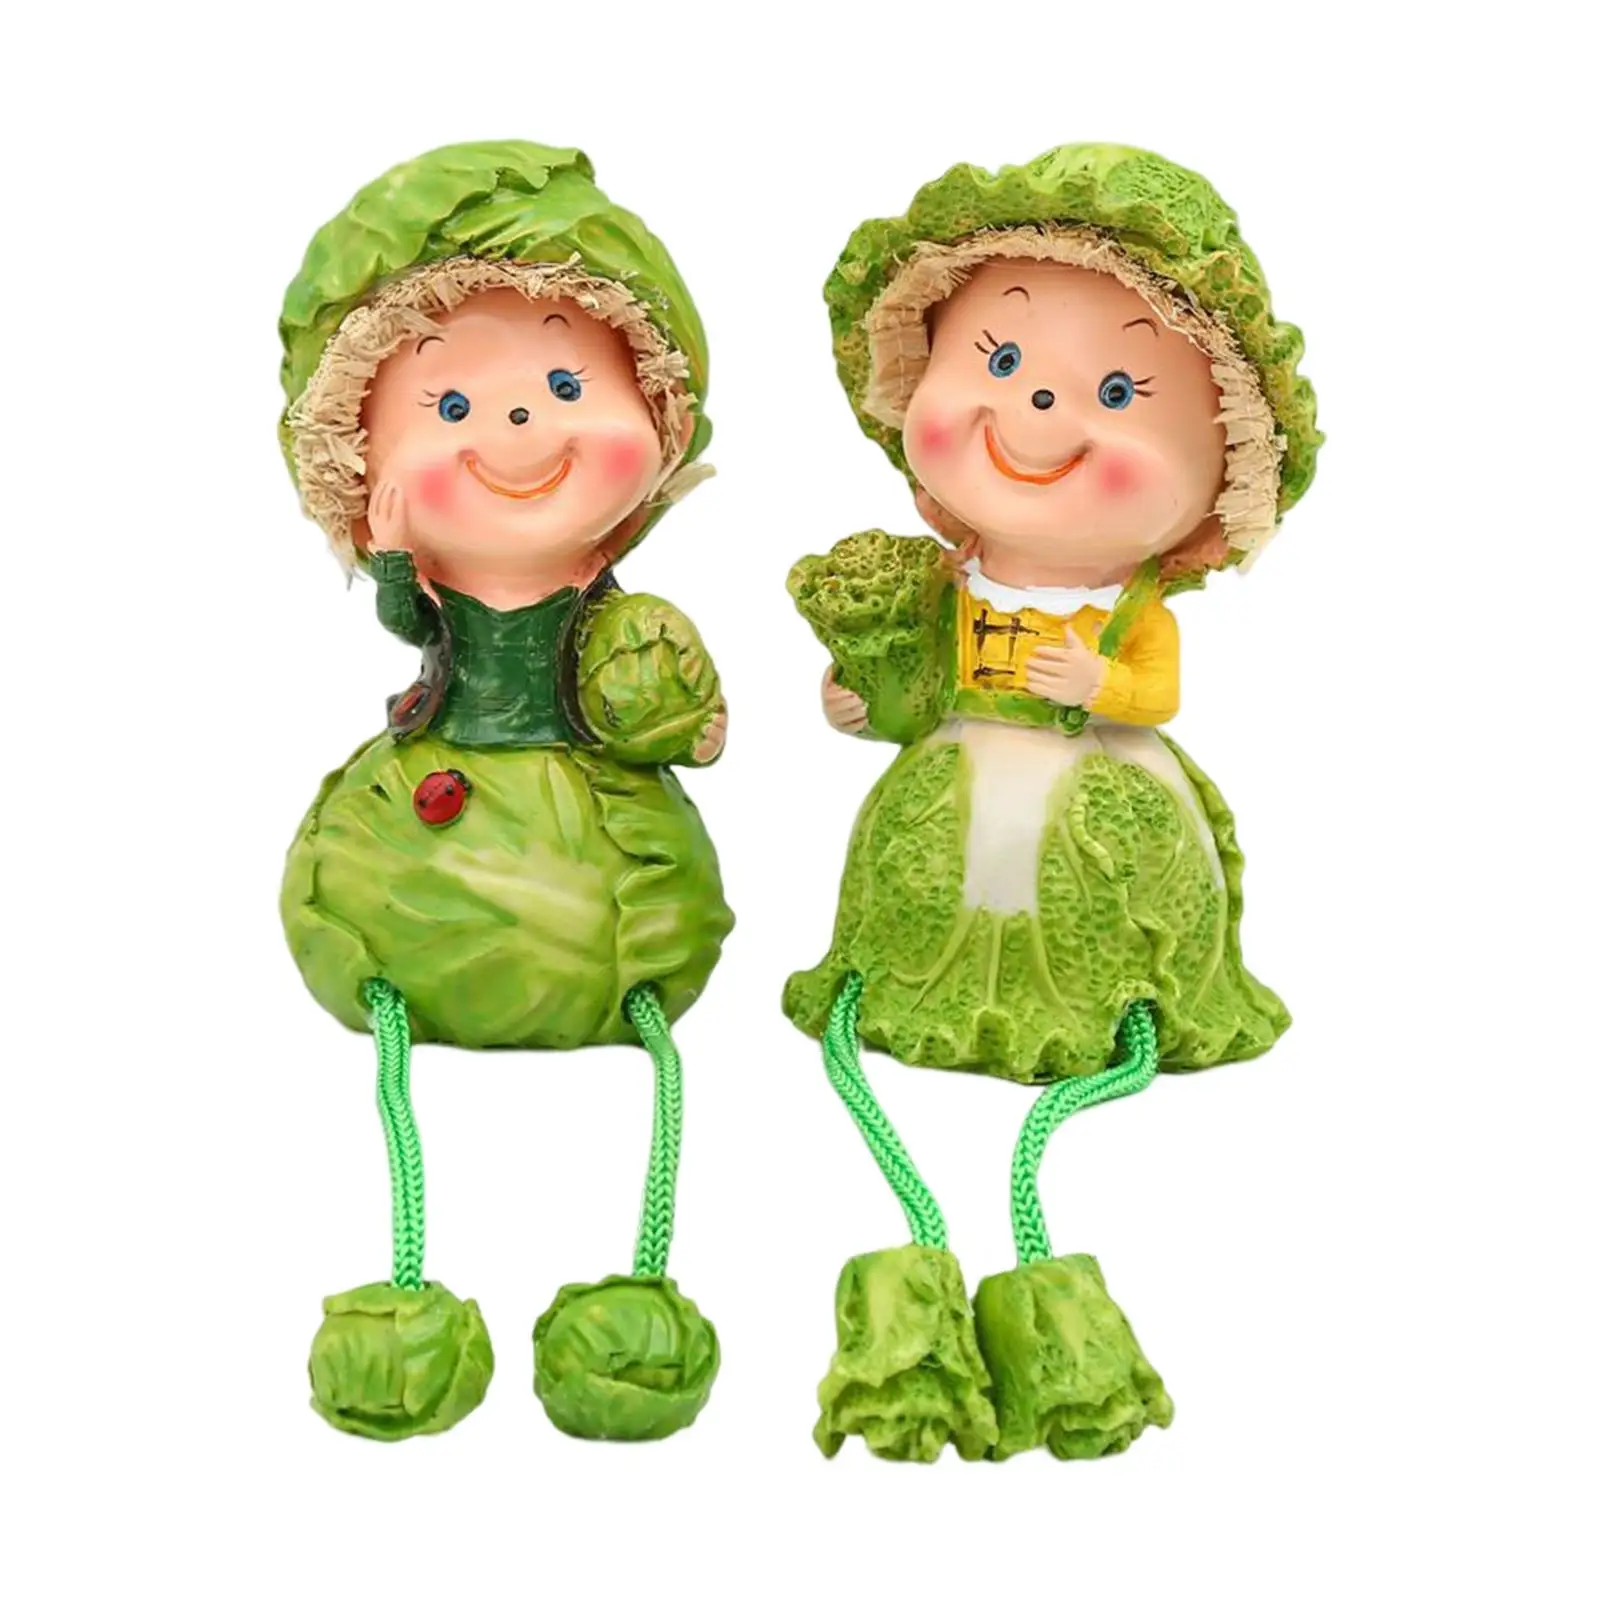 2x Hanging Feet Doll Resin Statue Sculpture Figurine Crafts for Counter Top